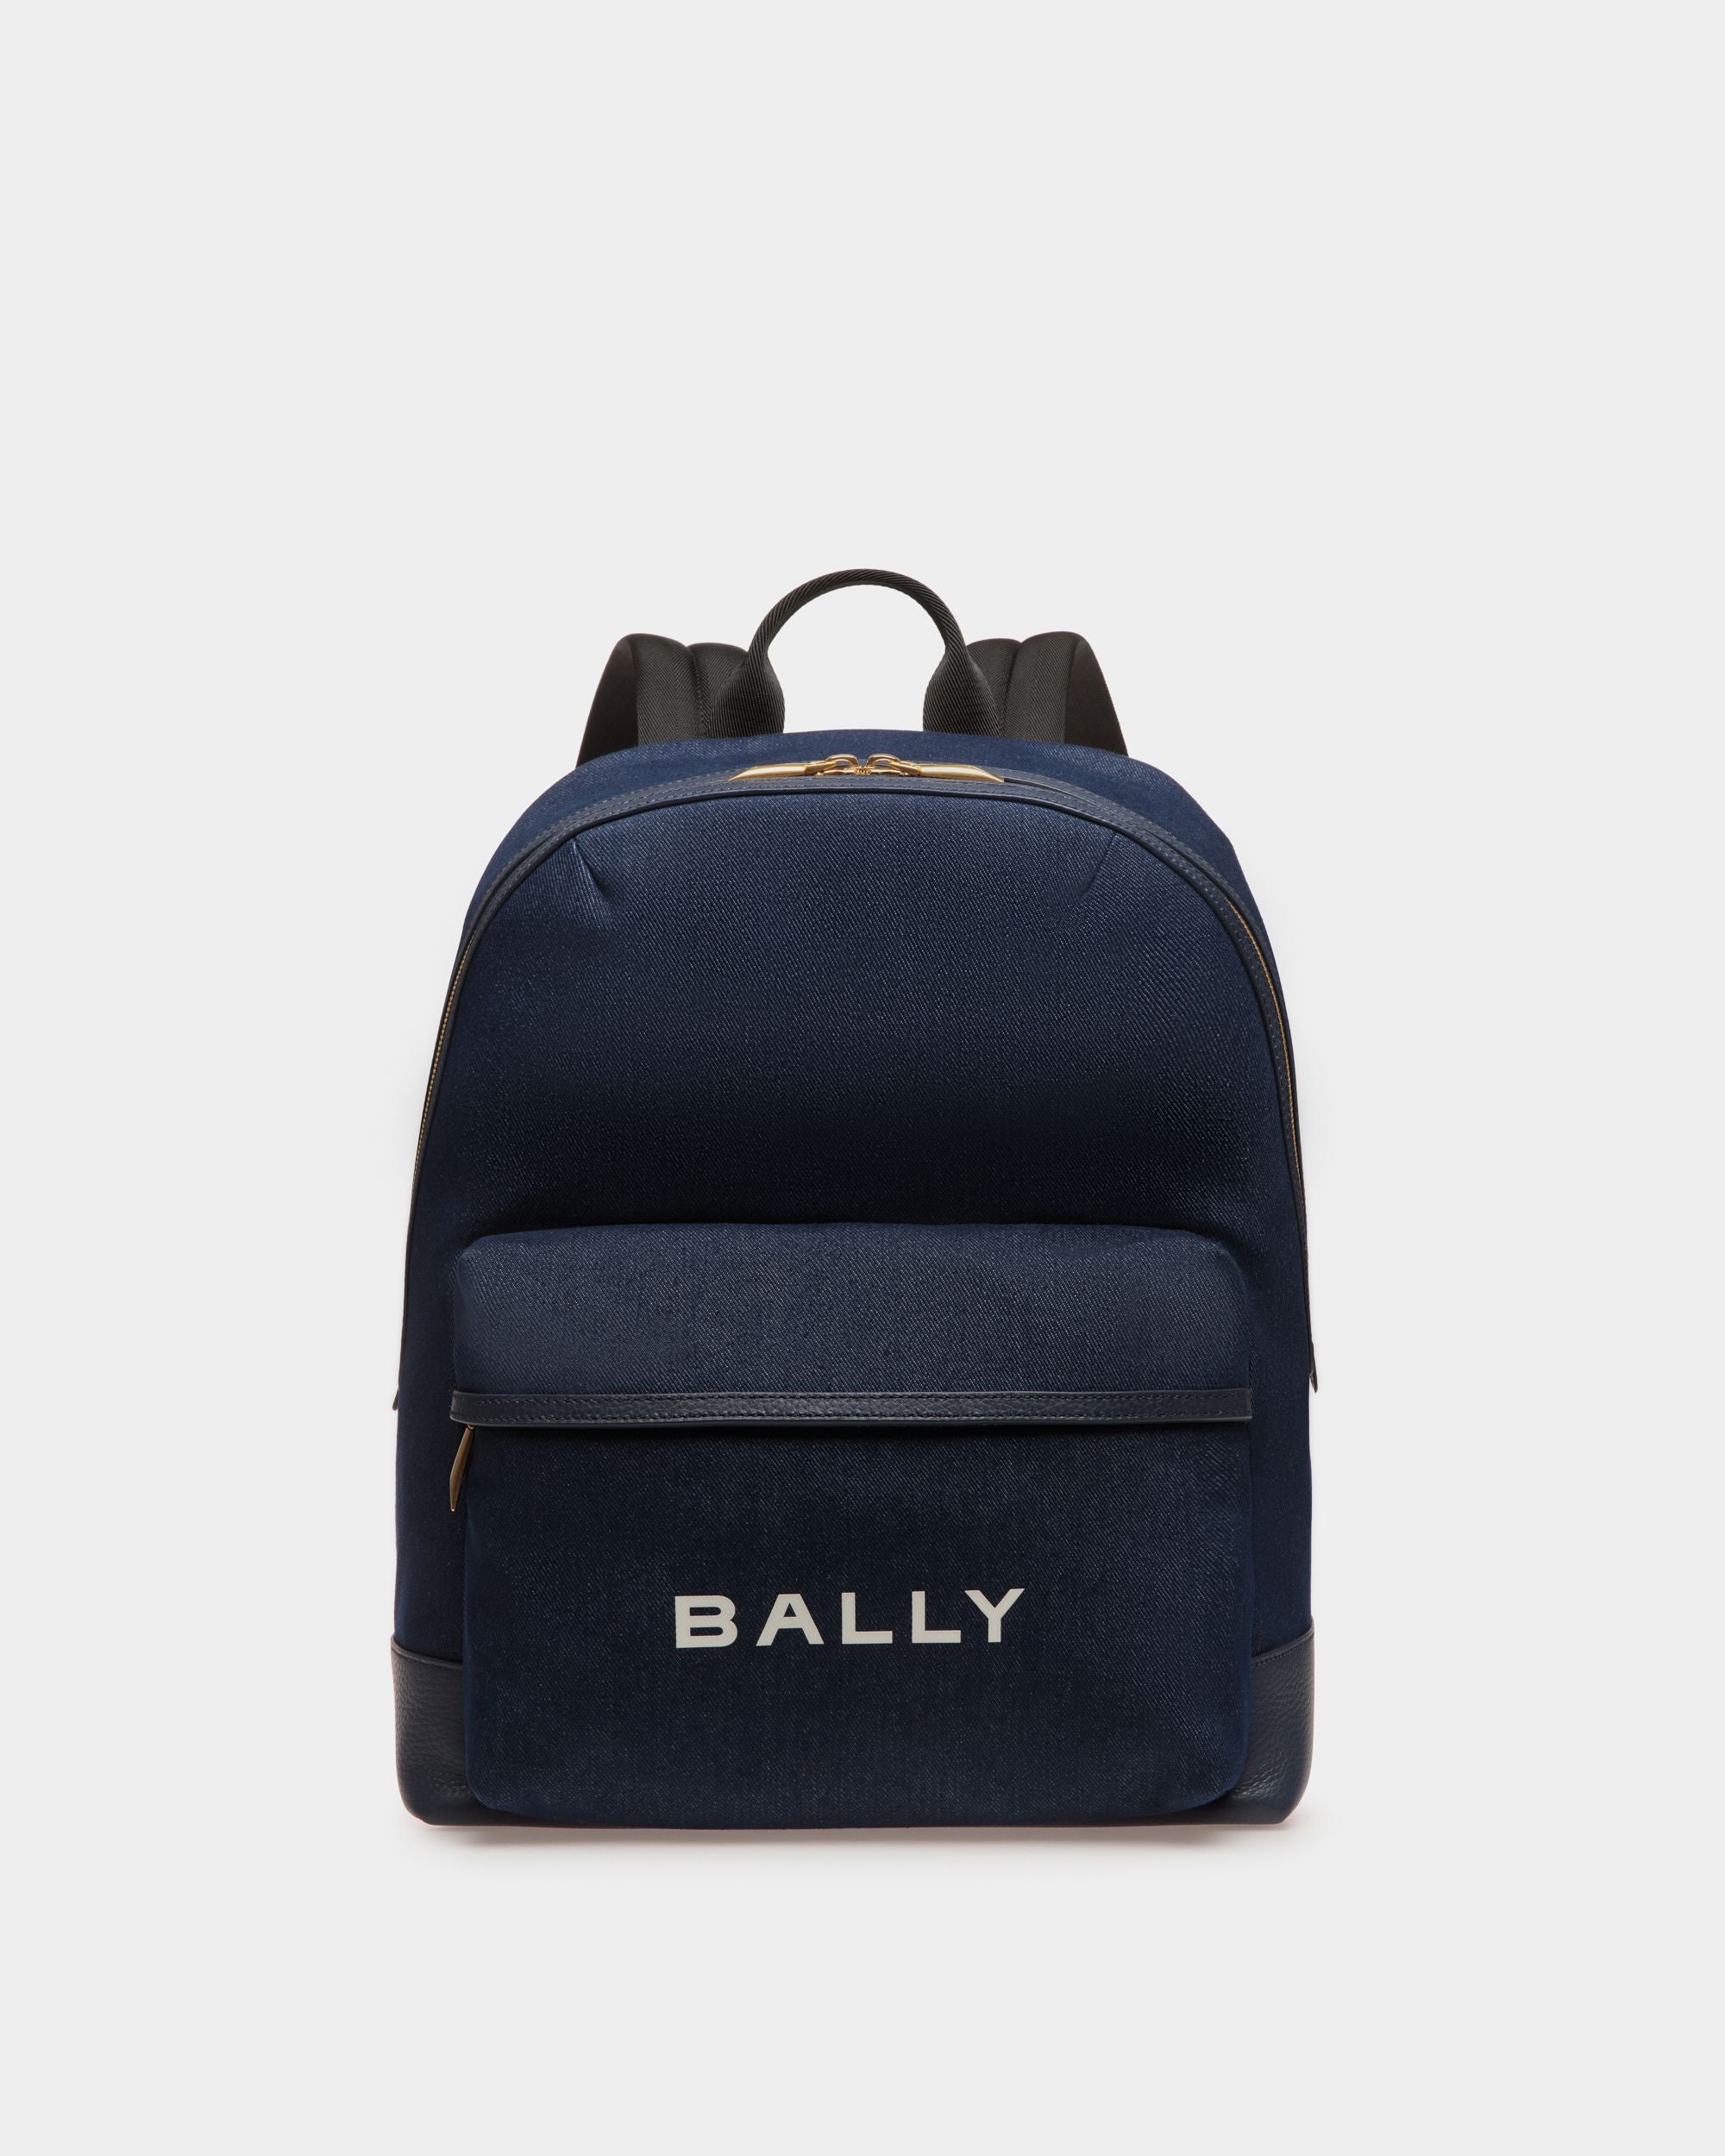 Bar | Men's Backpack in Blue Canvas And Leather | Bally | Still Life Front